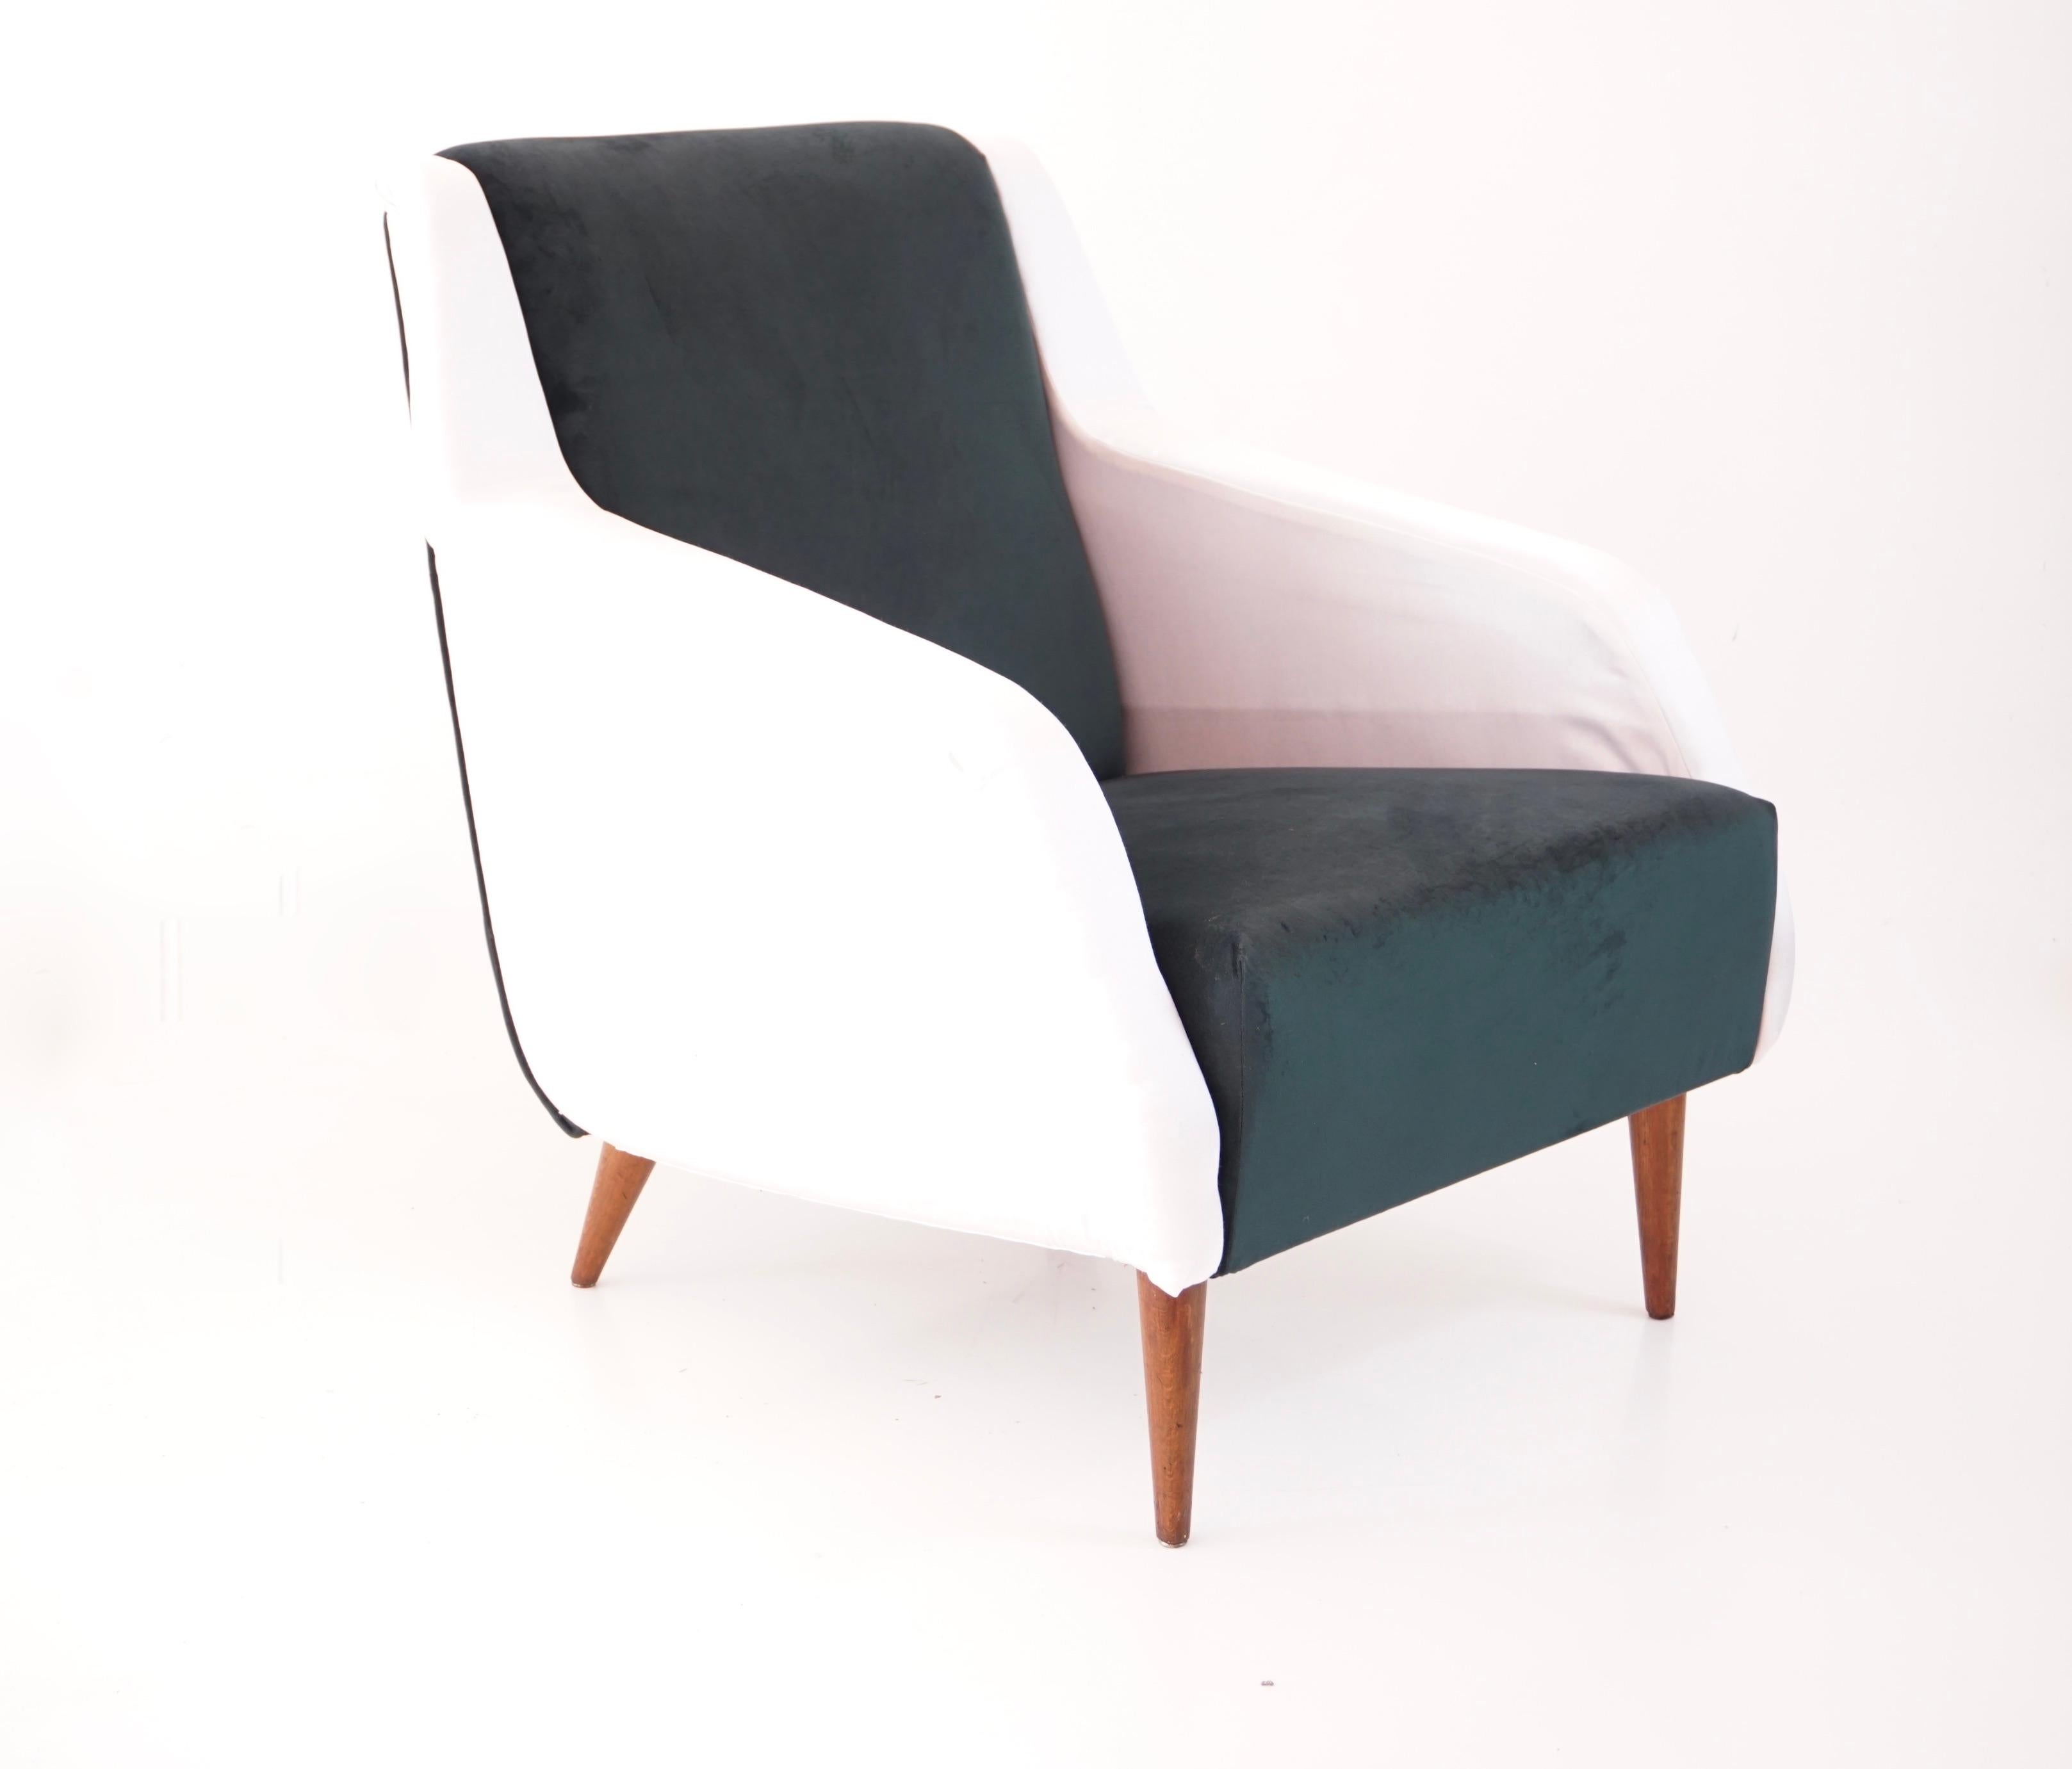 Carlo de Carli armchair, model n. 802 manufactured by Cassina, Italy, 1954. 
The wooden frame with foam upholstery rests on elastic ribbons. 
The armchair was reupholstered and covered bicoloured with a white silk and a forest green velvet 
the